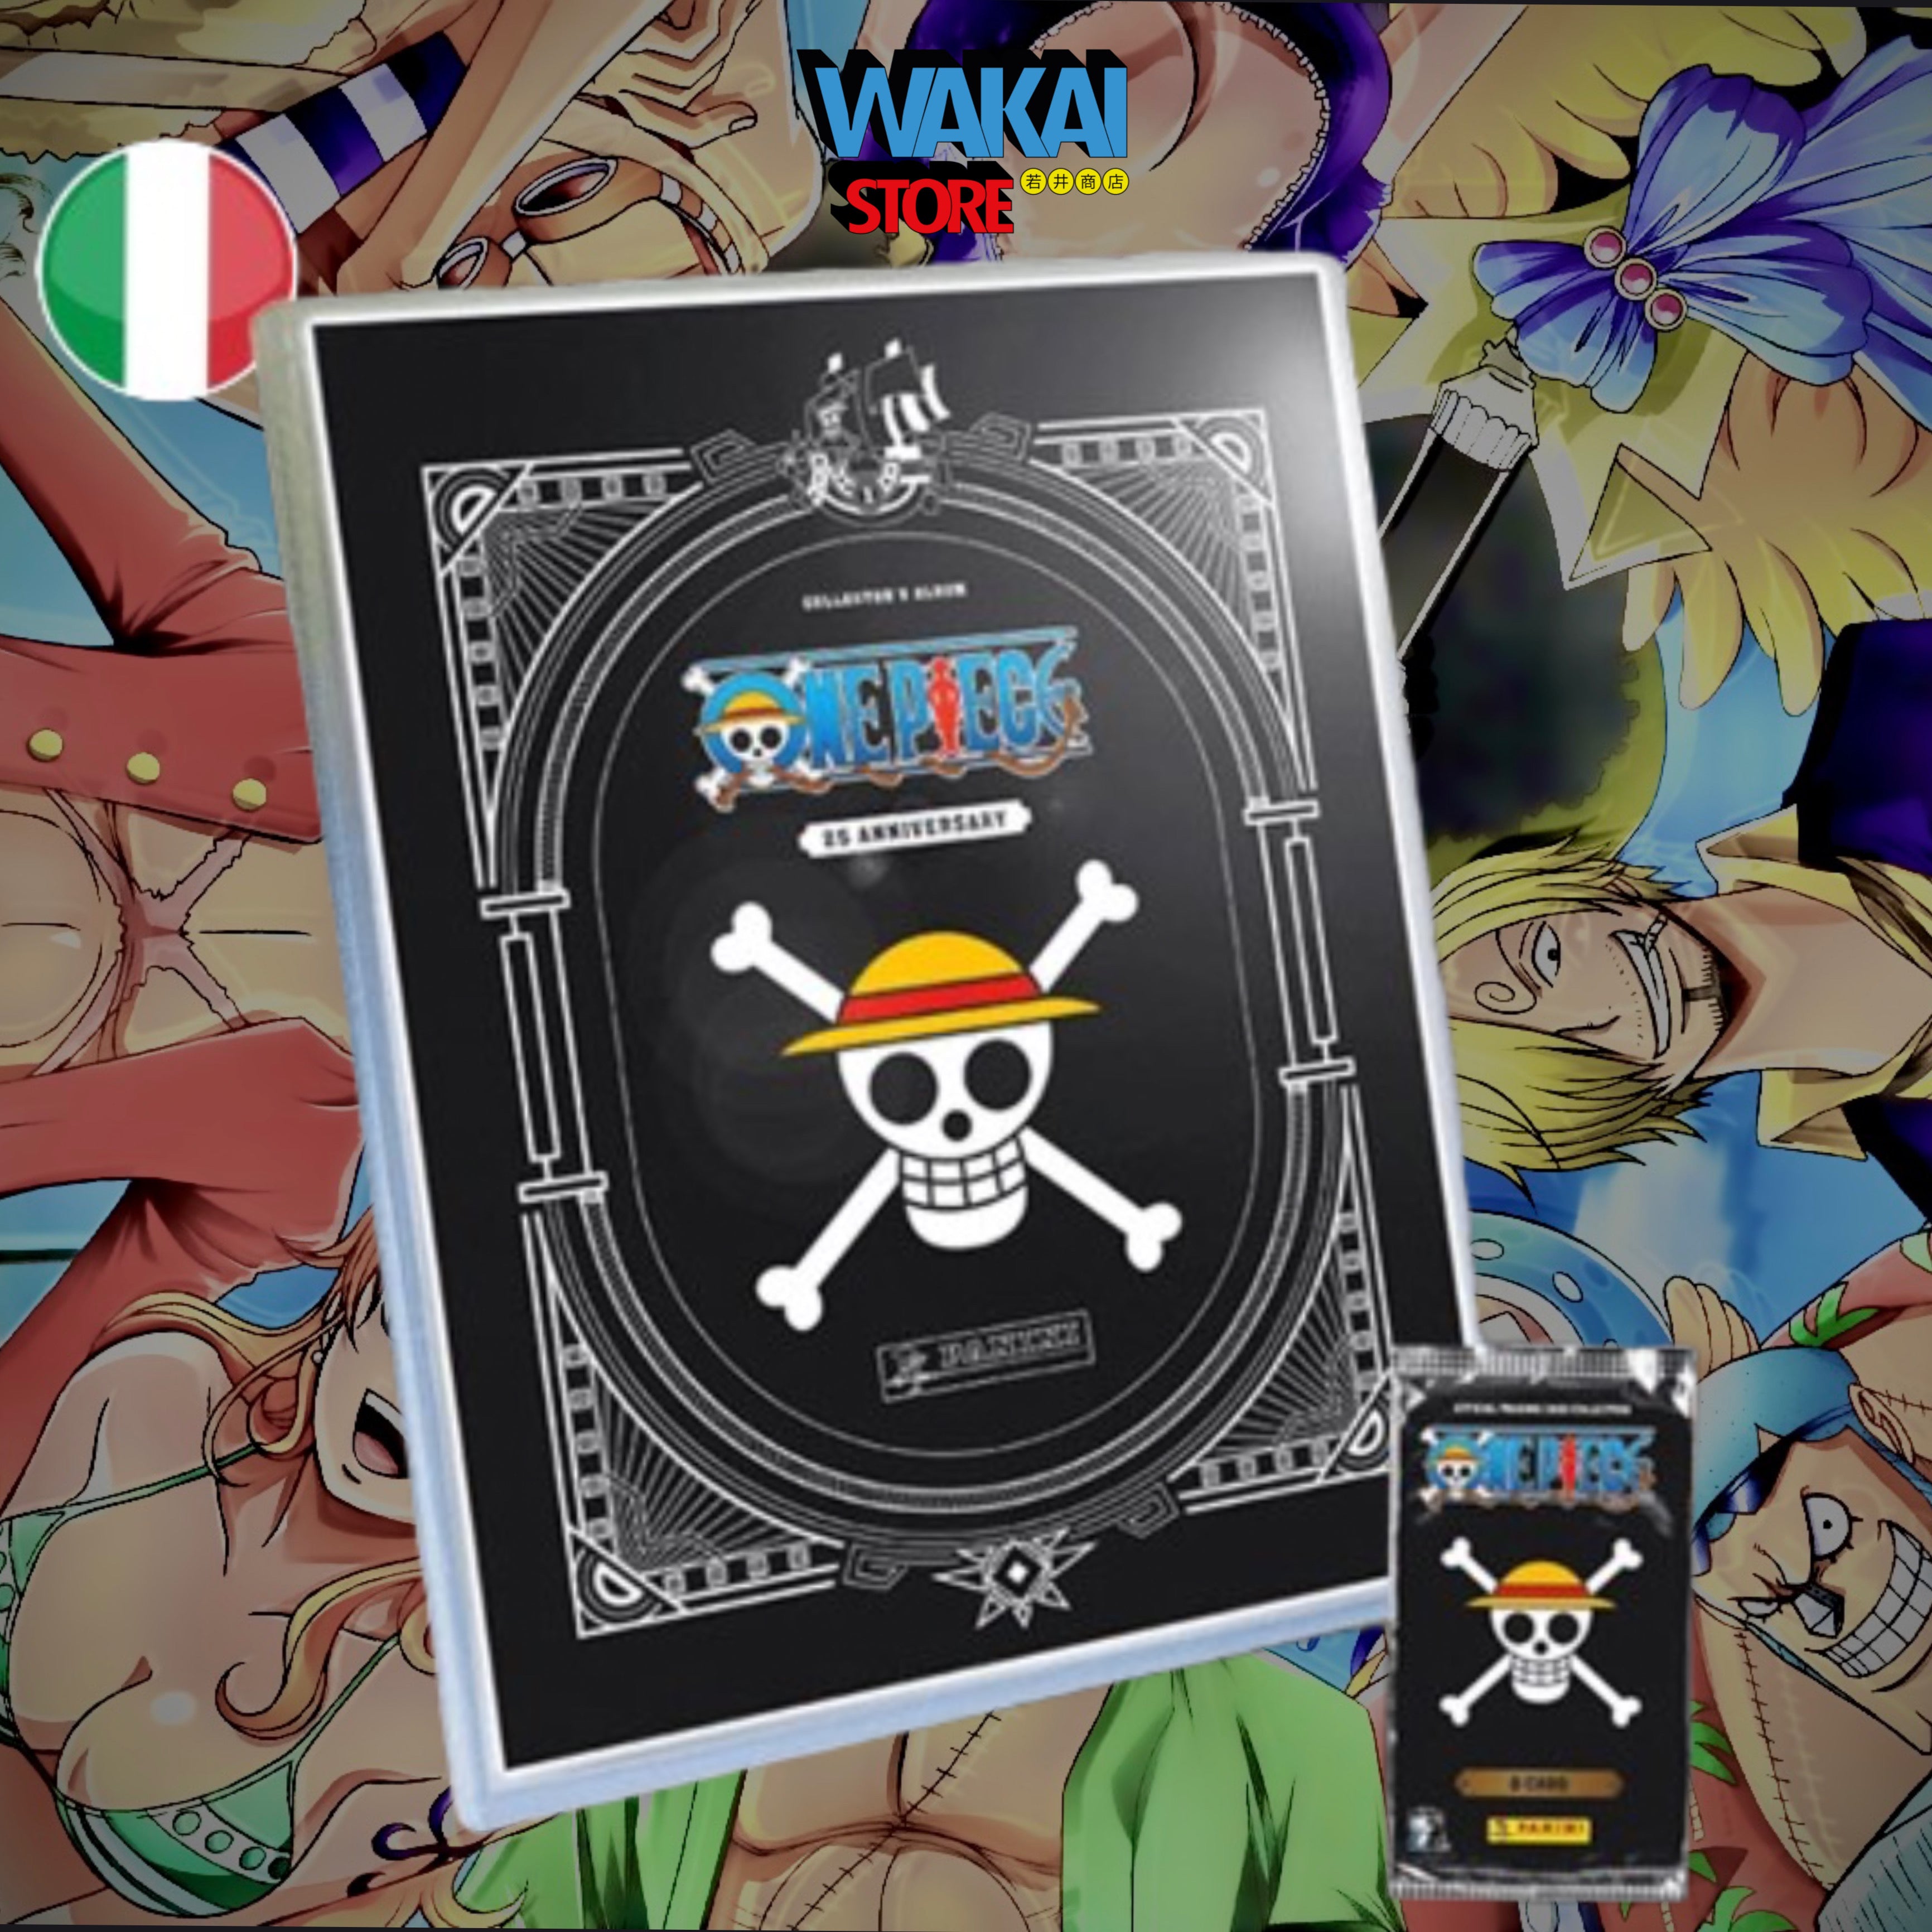 “”PRE-ORDER”” ONE PIECE 25TH ANNIVERSARY TRADING CARD - STARTER SET (contiene BINDER + 3 BUSTINE + 1 CARD LIMITED EDITION)